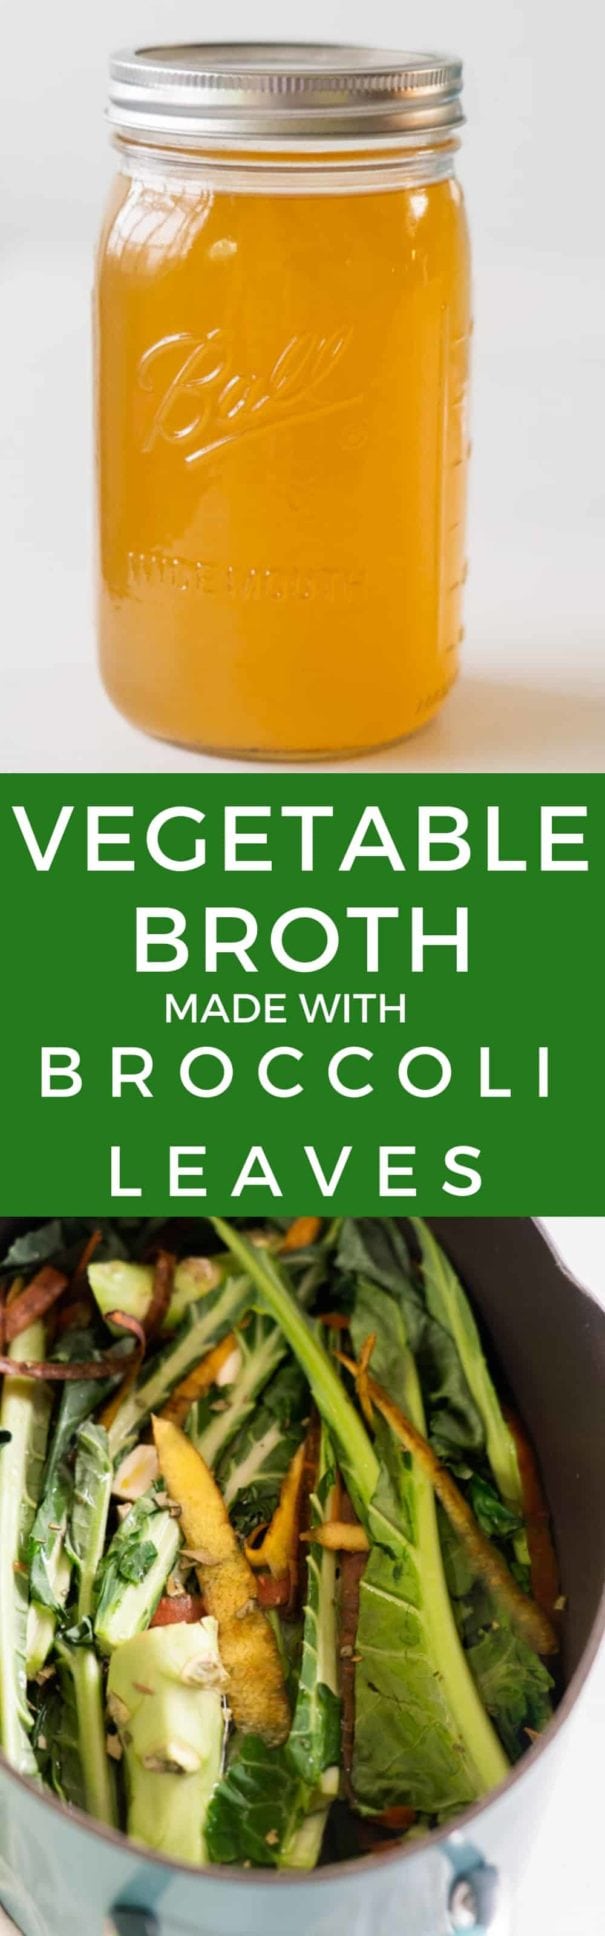 How to make vegetable broth with broccoli leaves - learn how to cook with broccoli leaves! This is a healthy, easy recipe that you can use in soups, casseroles, slow cooker, rice dishes, and more.  Broccoli leaves and stems are filled with health benefits, so make sure to use them!